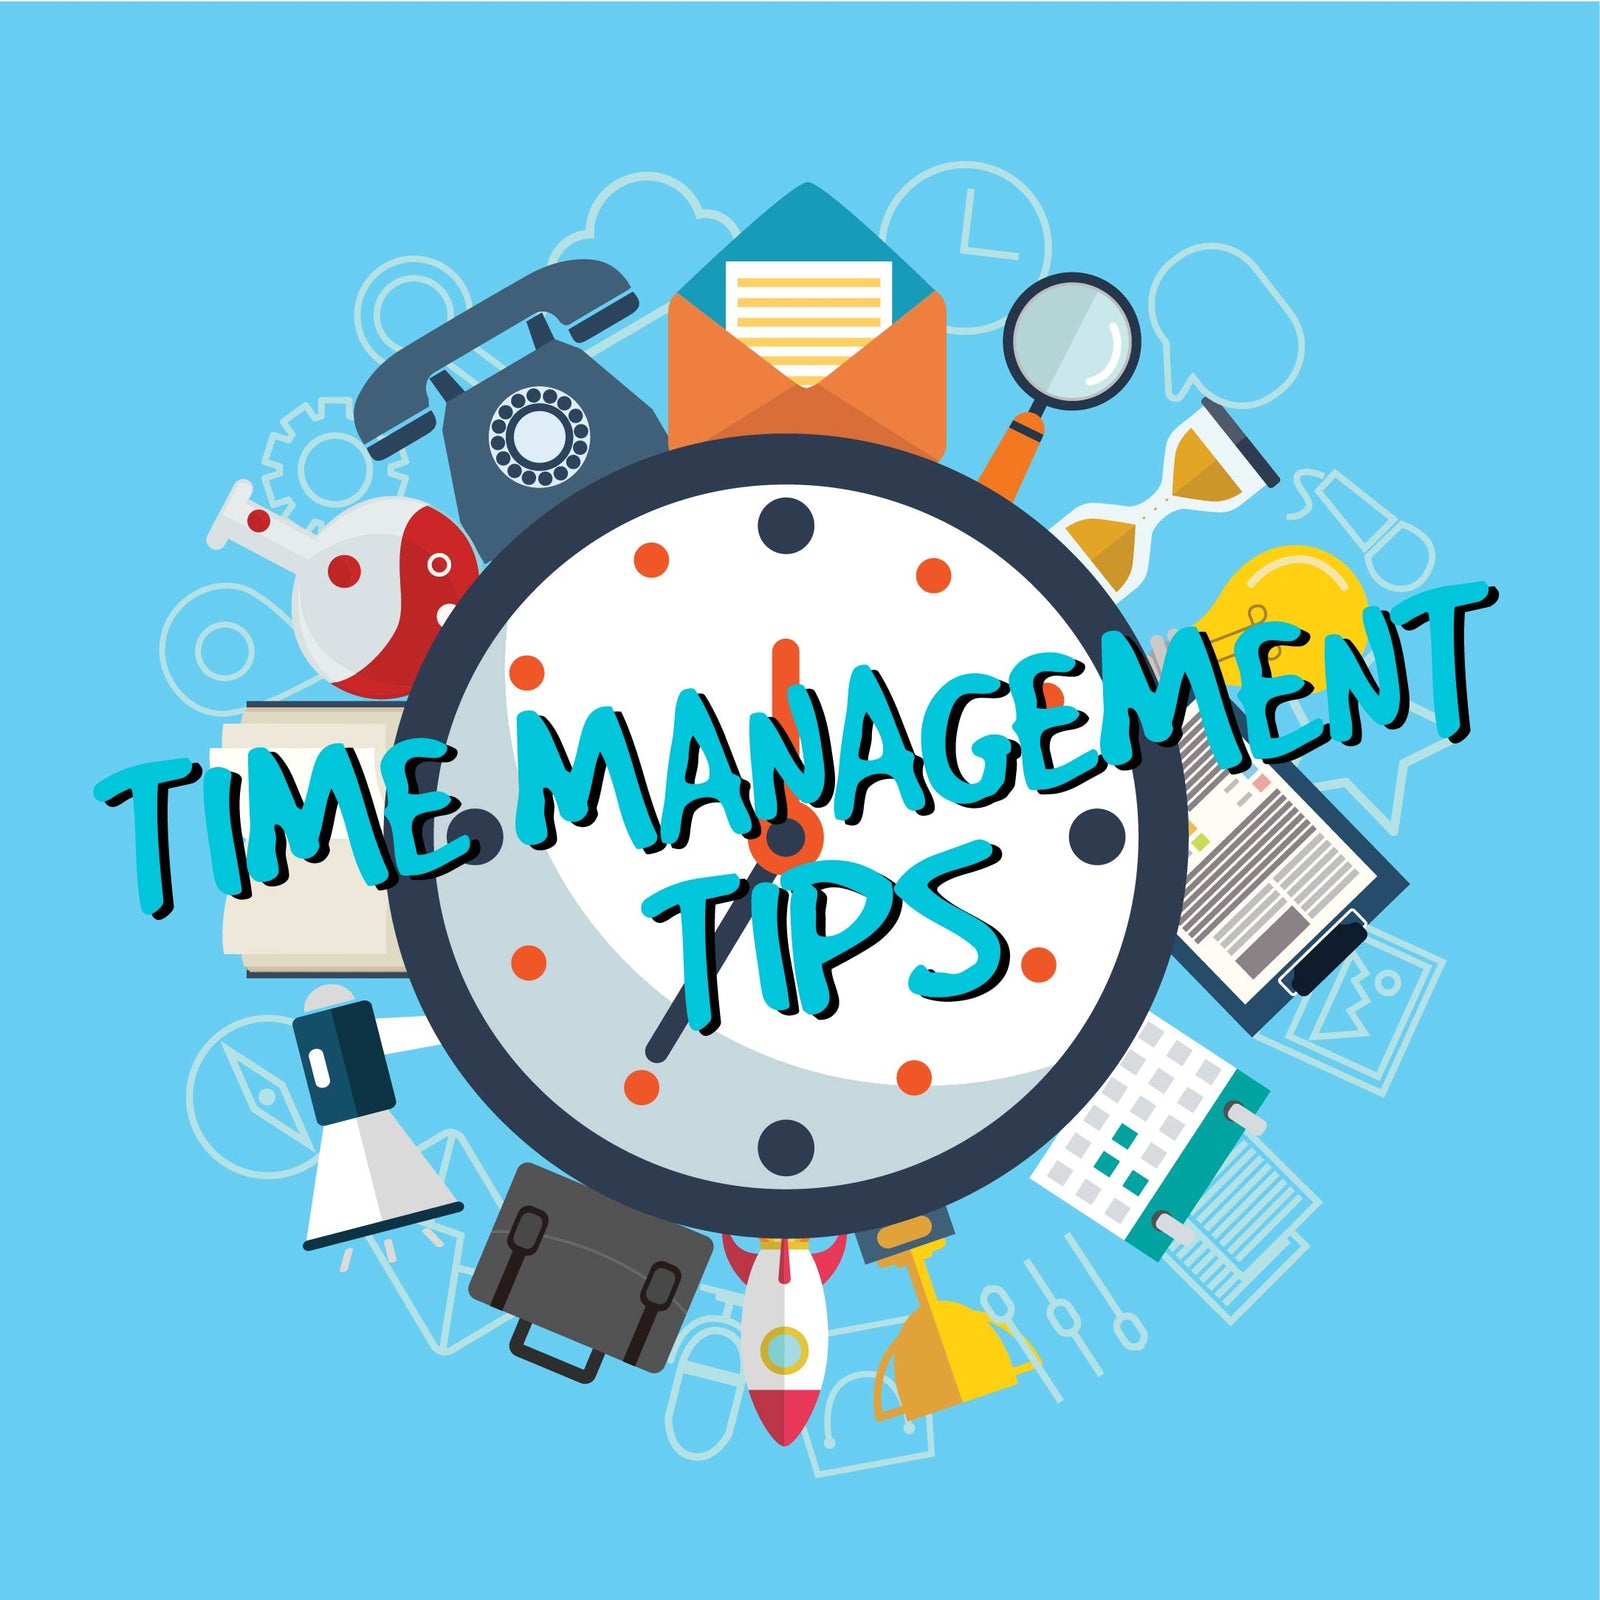 Are You a Busy Mom? These 9 Tips for Time Management are for You!